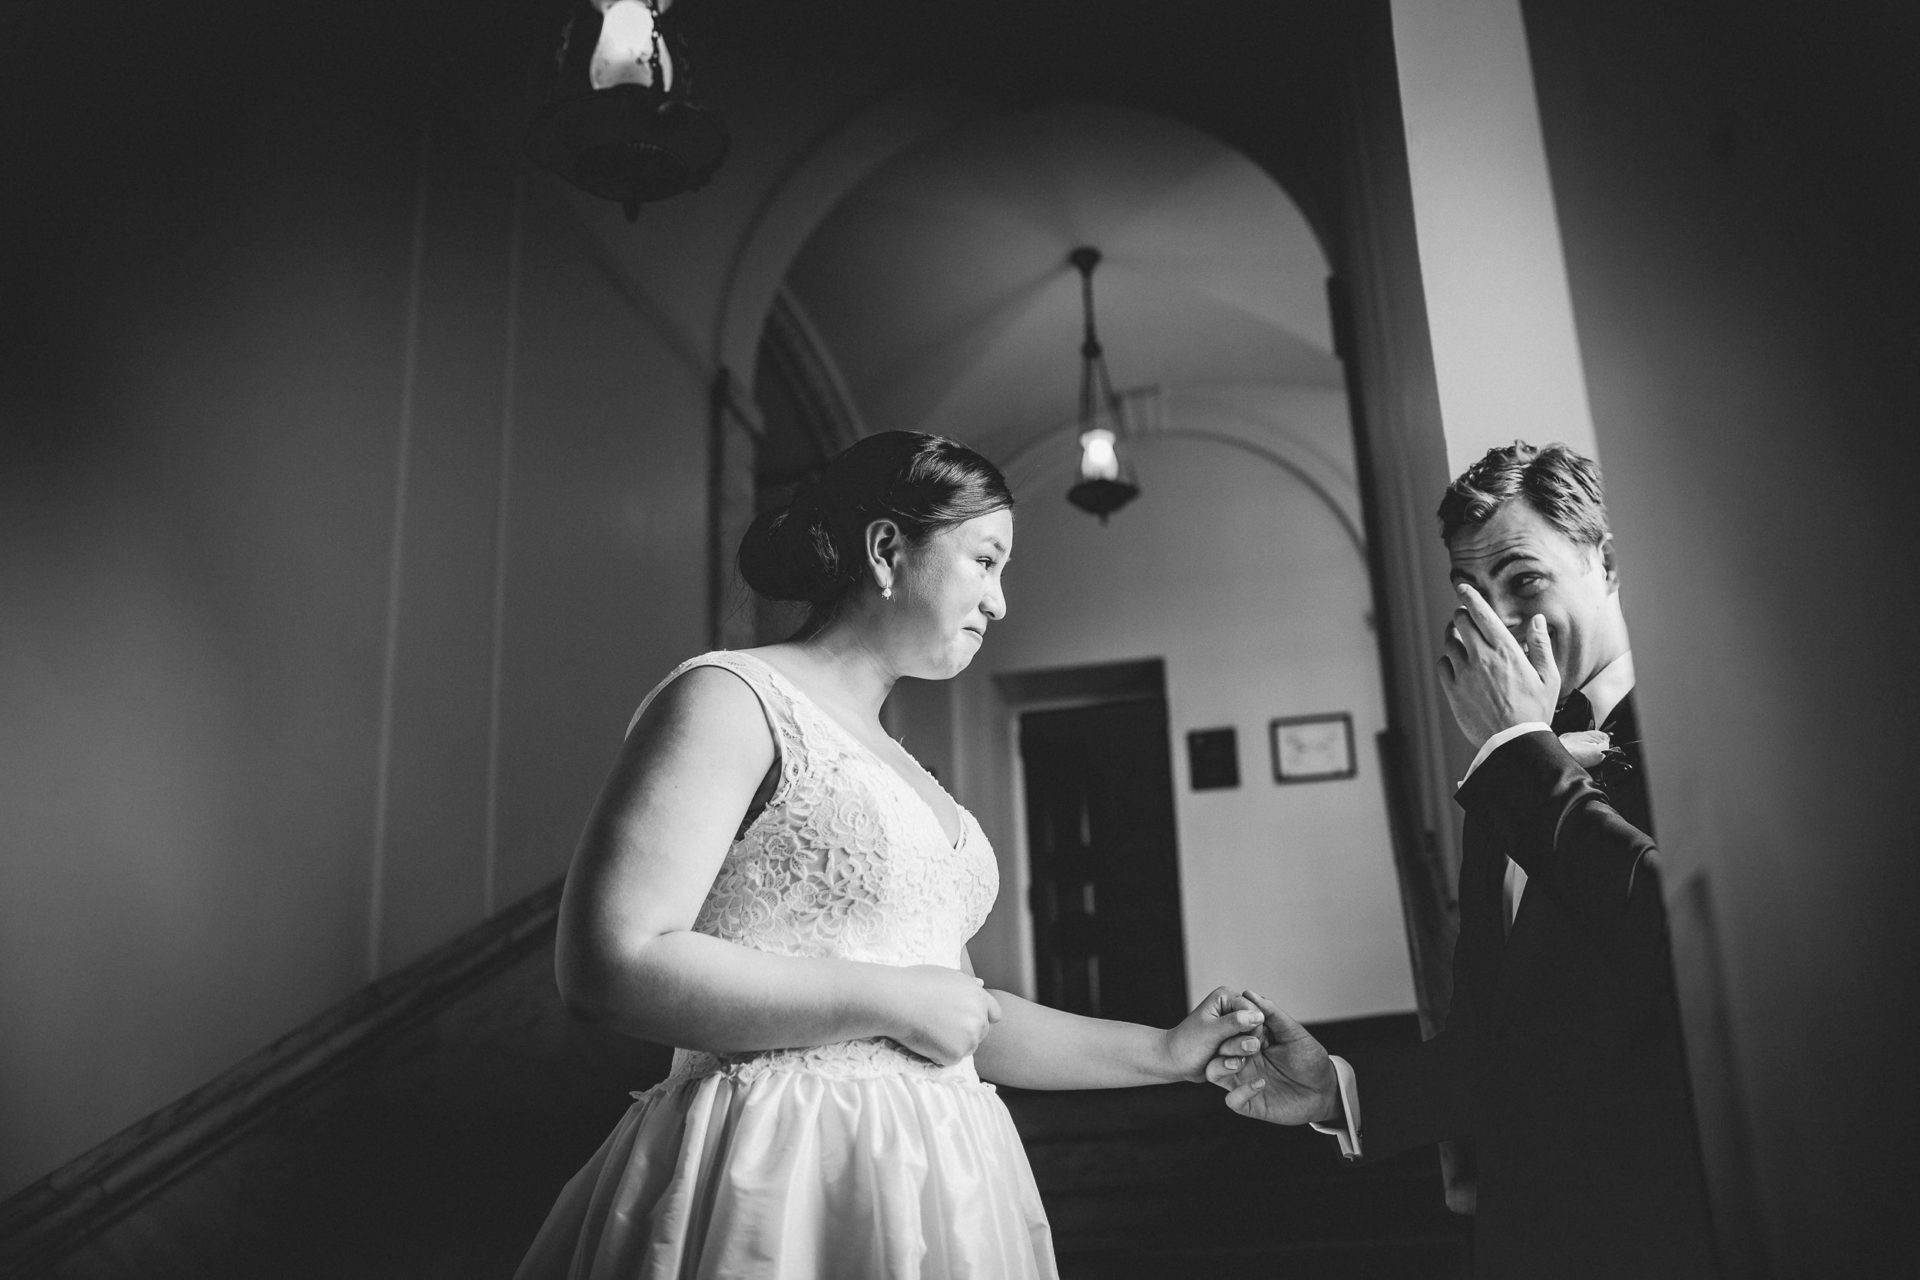 A bride and groom holding hands with emotional looks of love on their faces in a sidelit shadowy hallway. The groom wipes tears from his eyes.